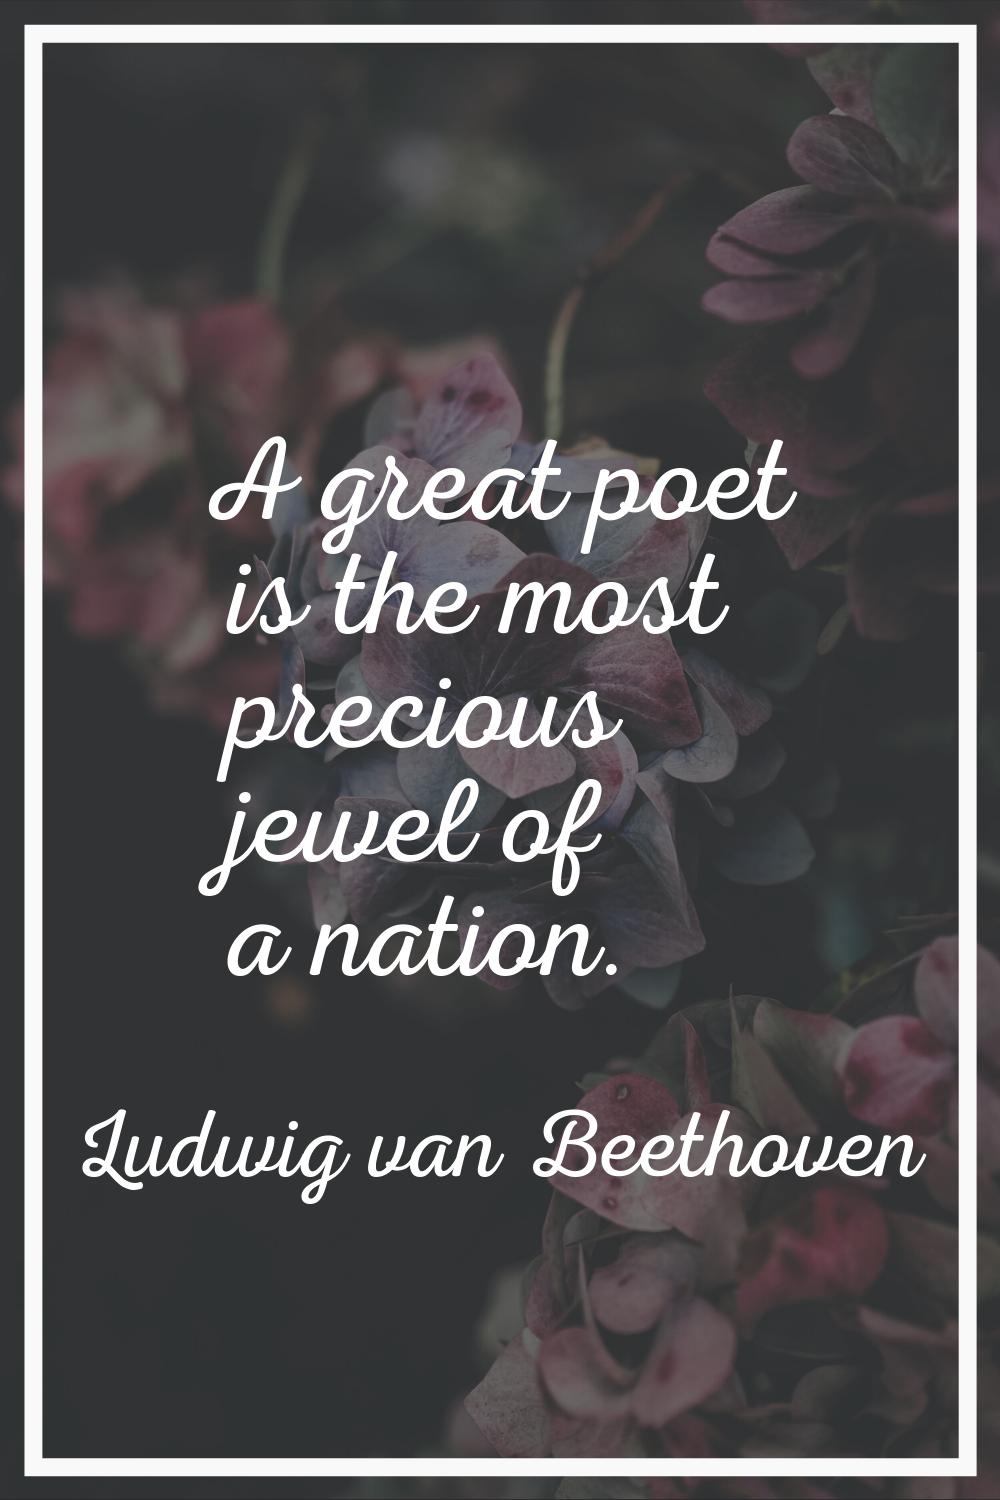 A great poet is the most precious jewel of a nation.